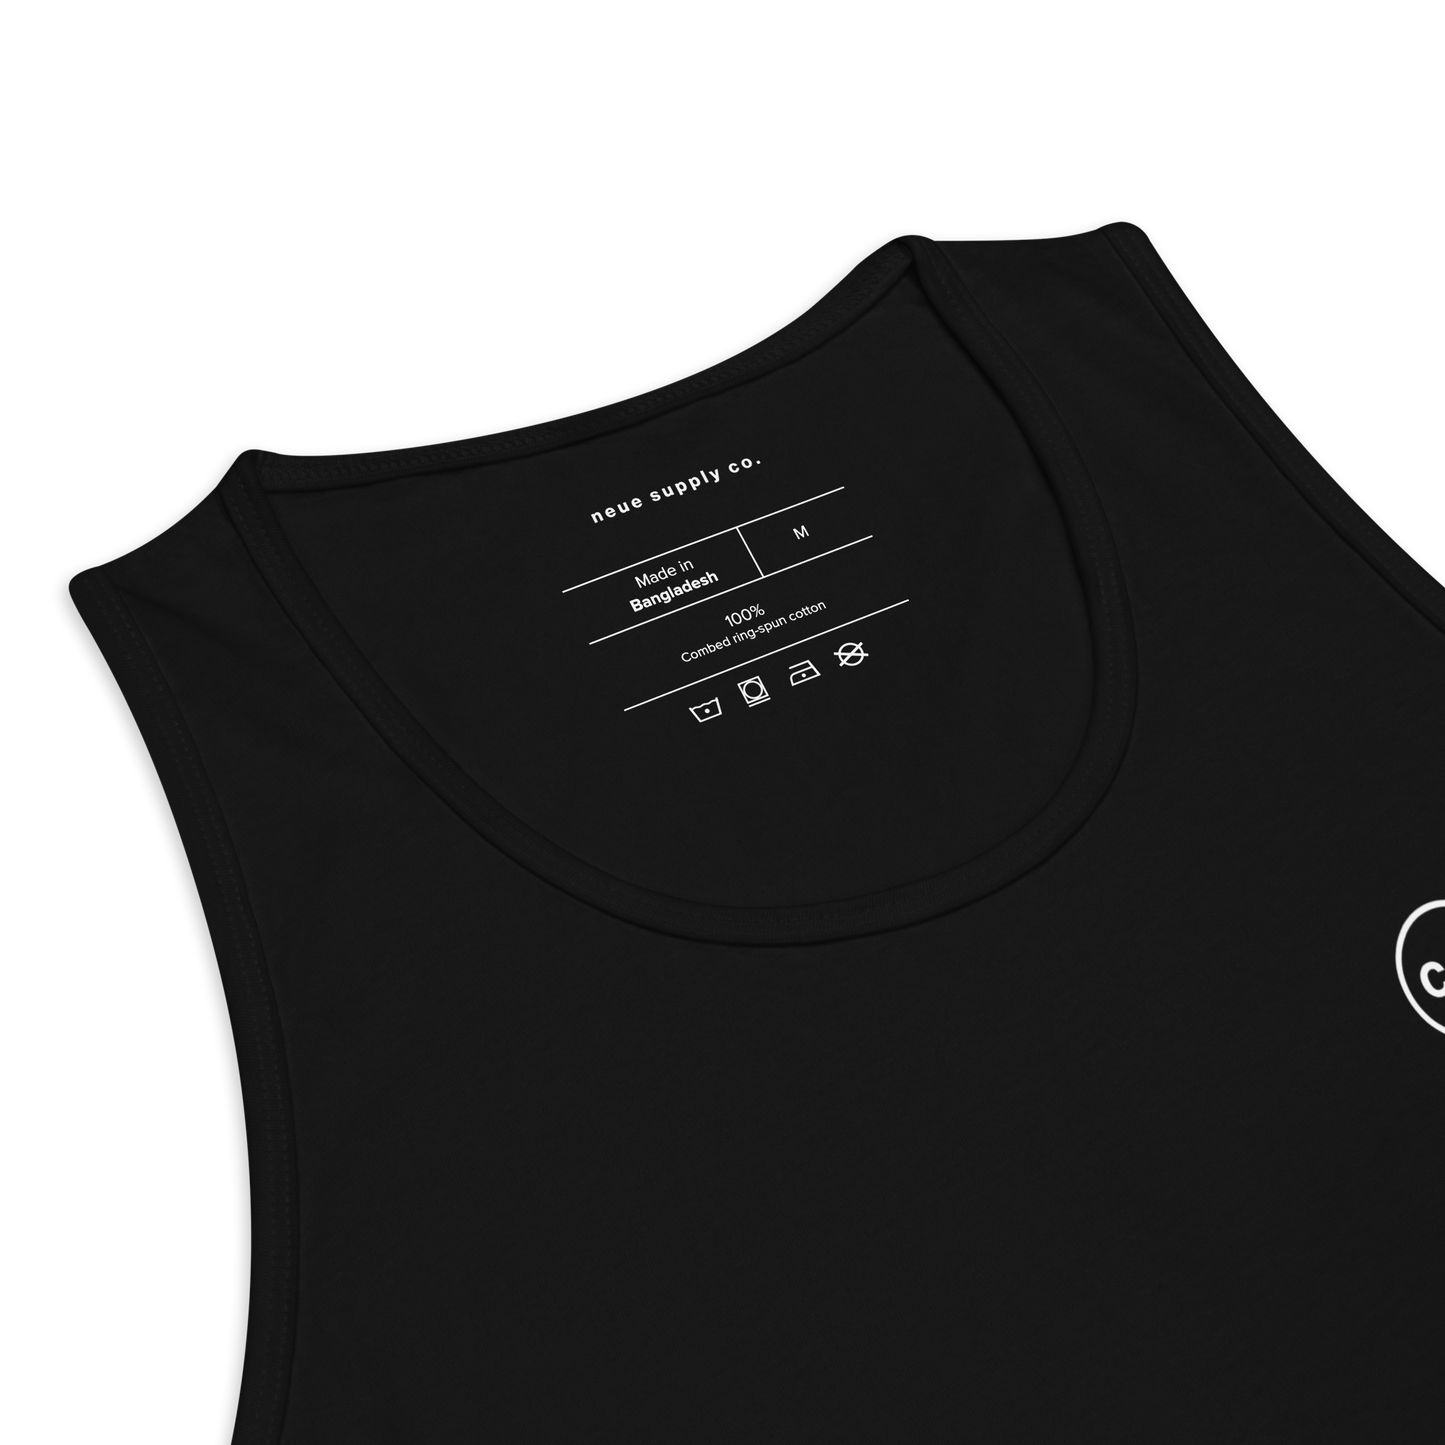 Neue Supply Co. Essential Workout Tank Top for Men in Black detail view